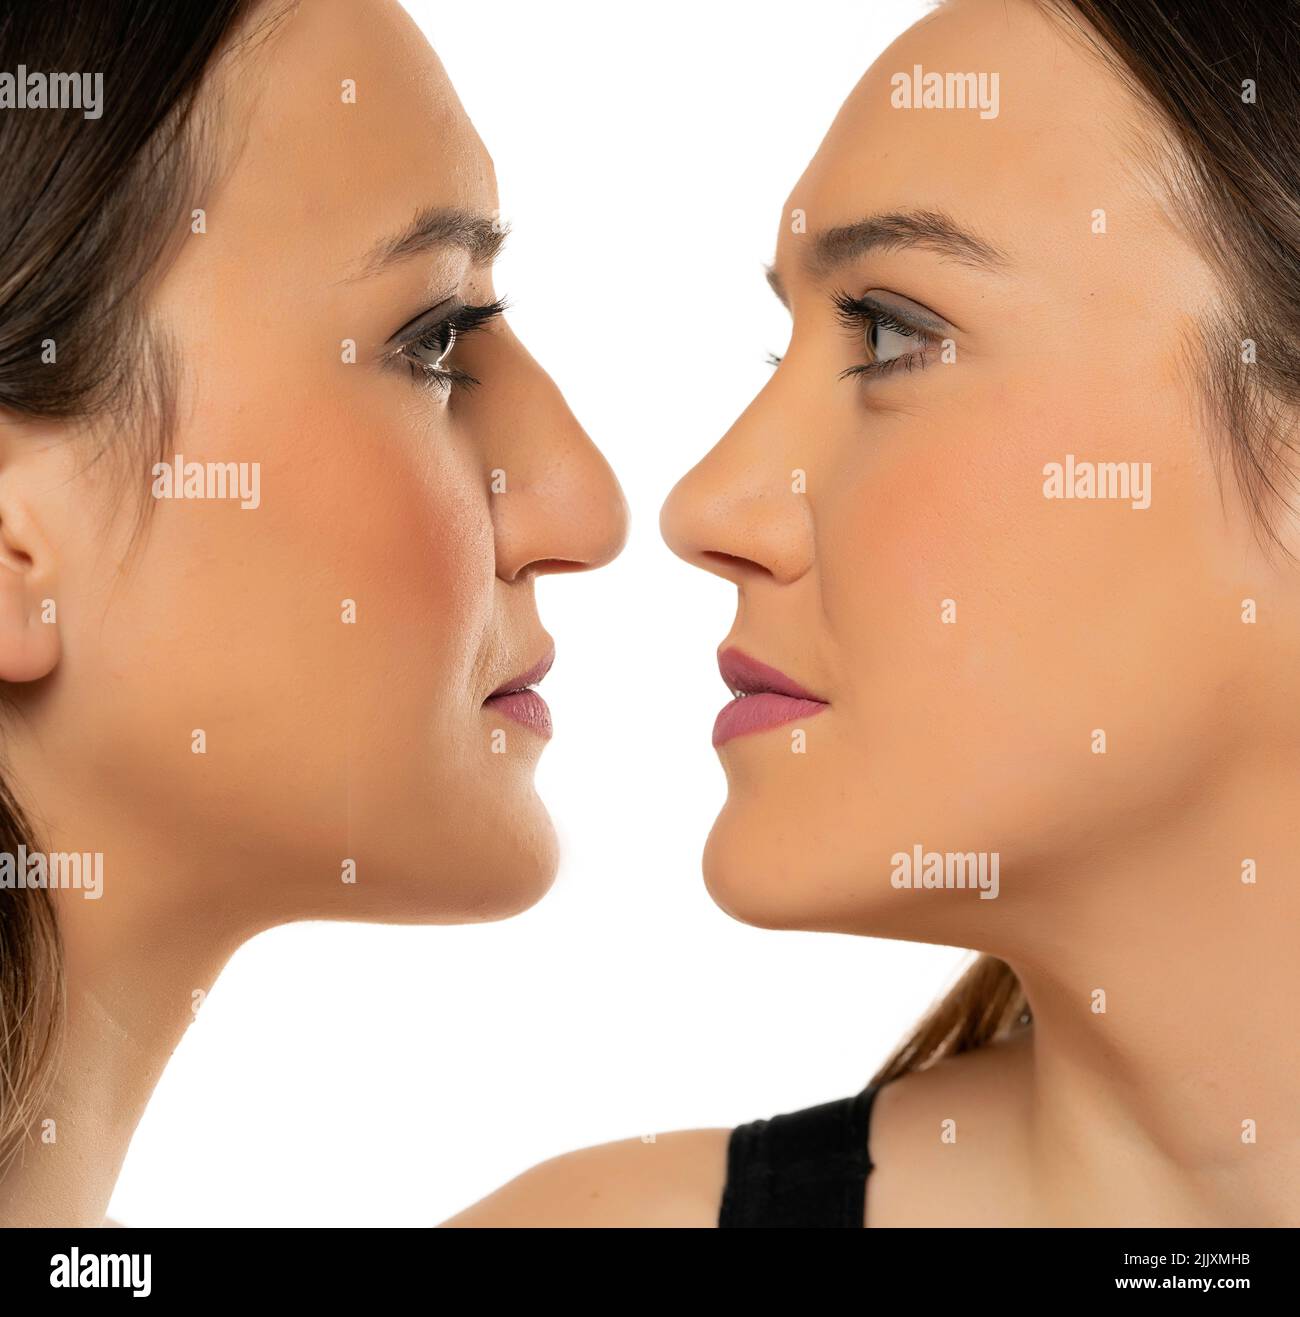 comparative portrait of female face, before and after plastic surgery of the nose on a white background Stock Photo